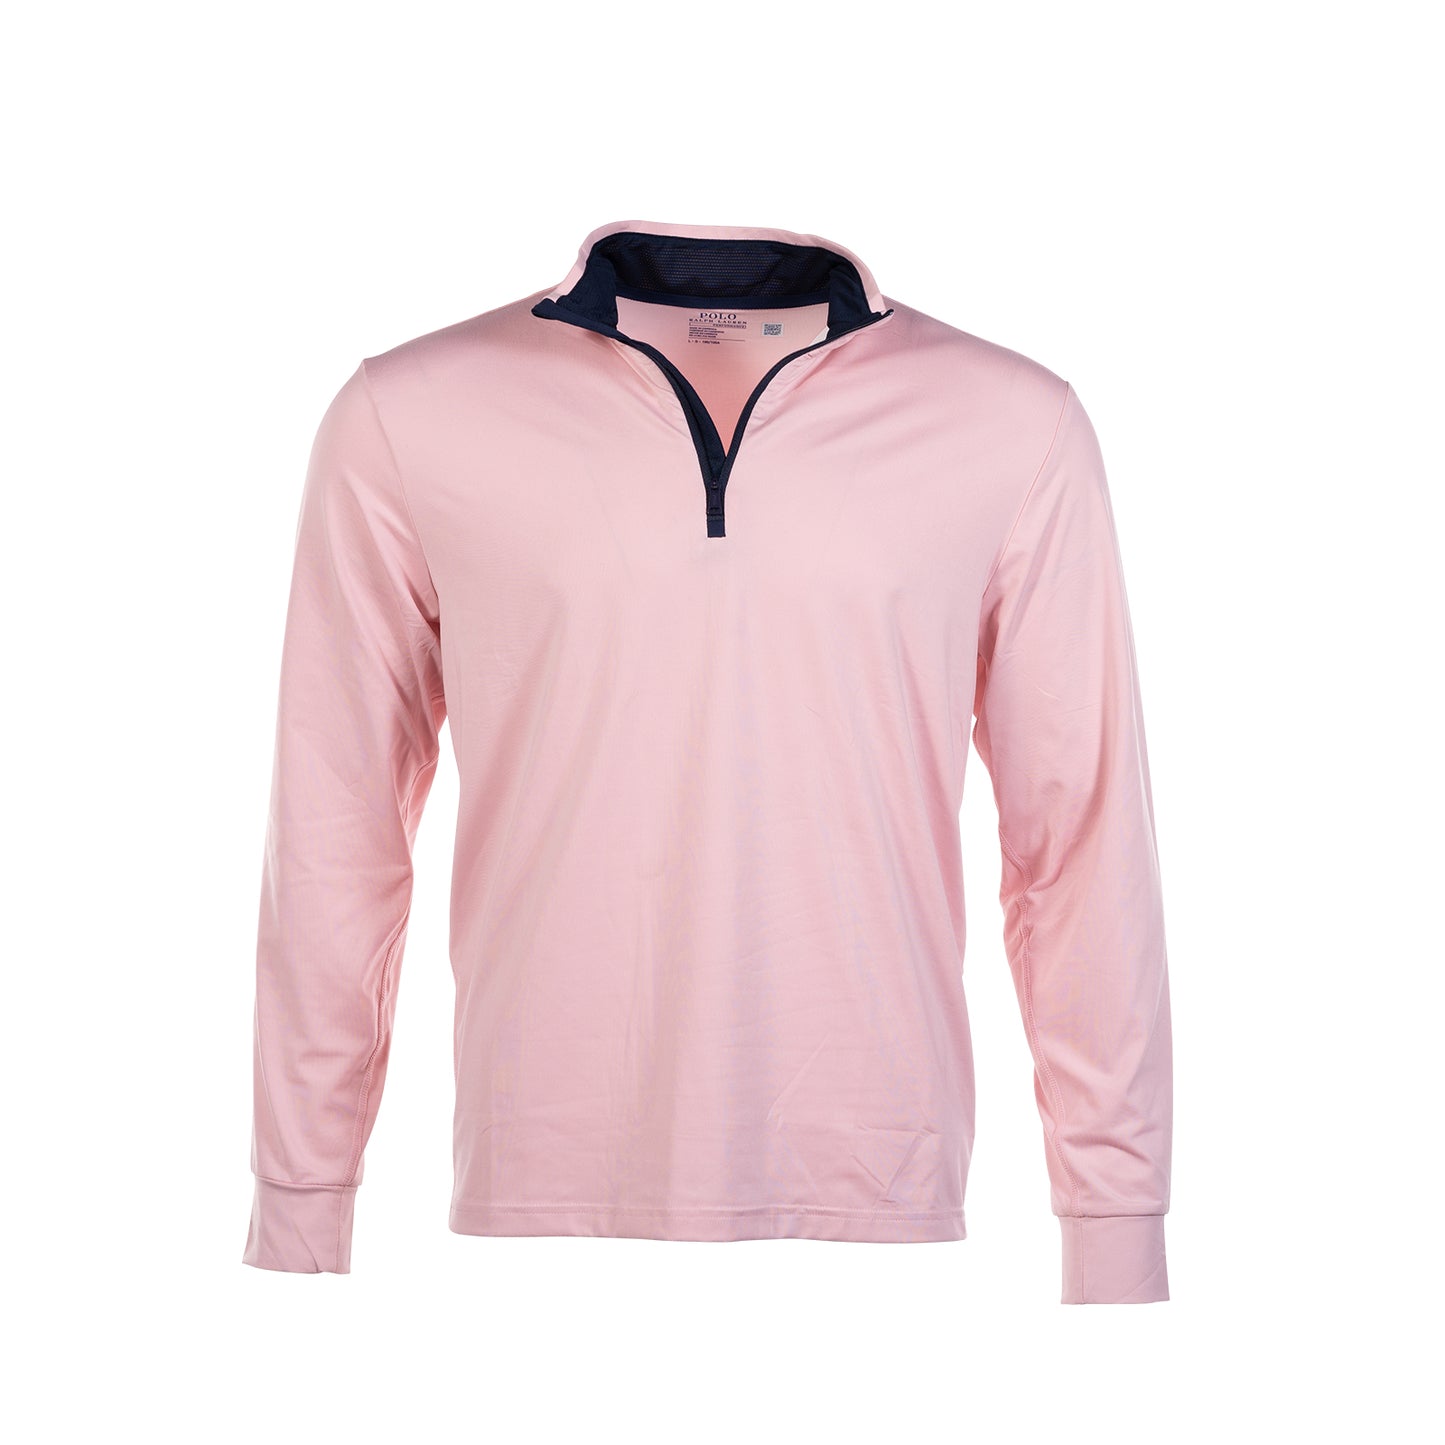 RLX Long-Sleeve Stretch Peached Jersey 1/2 Zip Pullover - Pink Sand